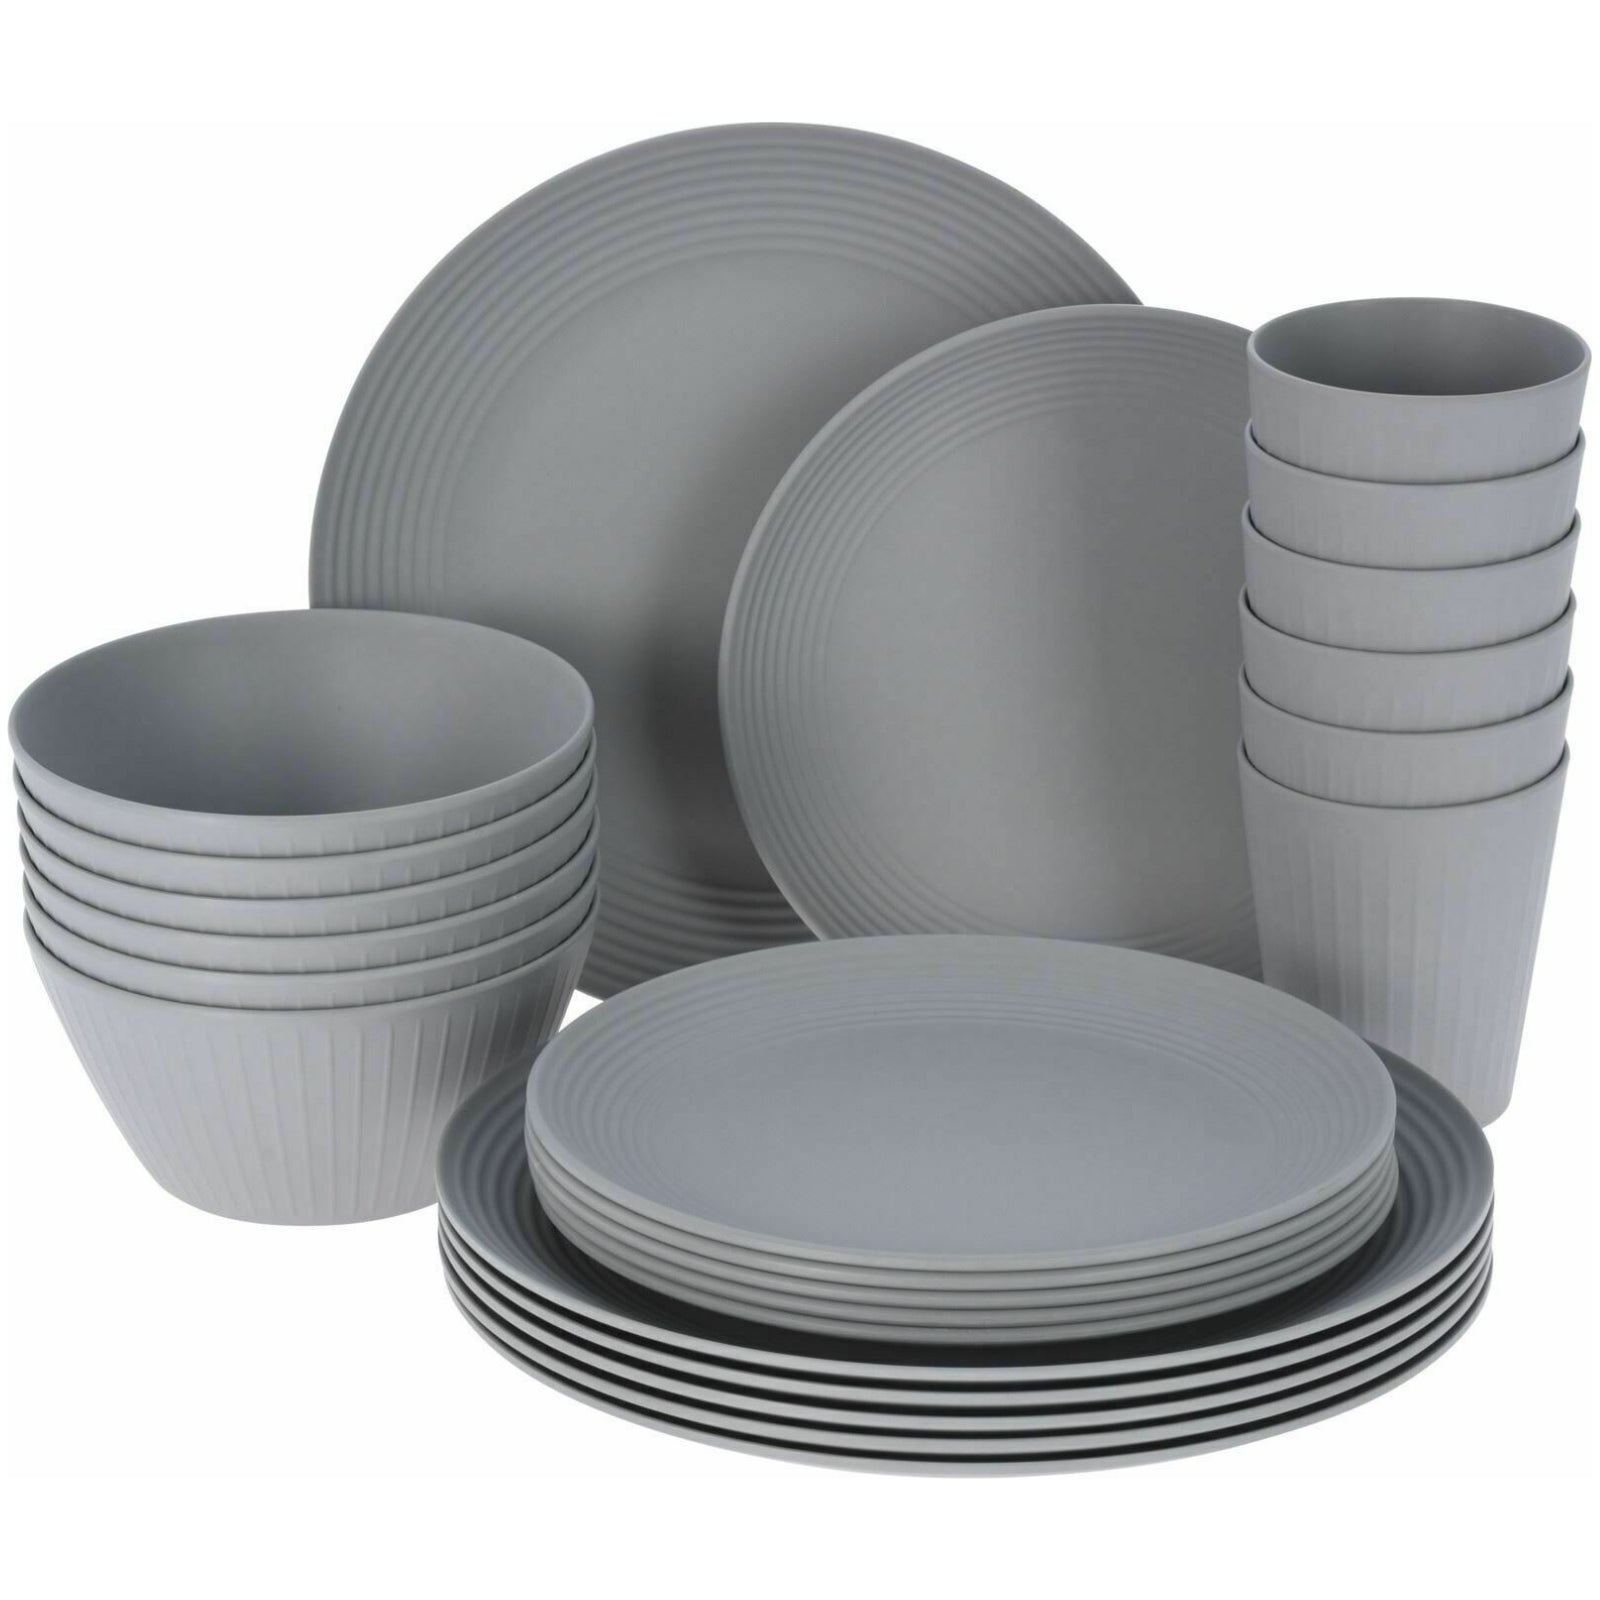 Geezy Dining Set, Plate, Bowl, Cup 24 Pcs Grey Picnic Dinner Set for 6 People